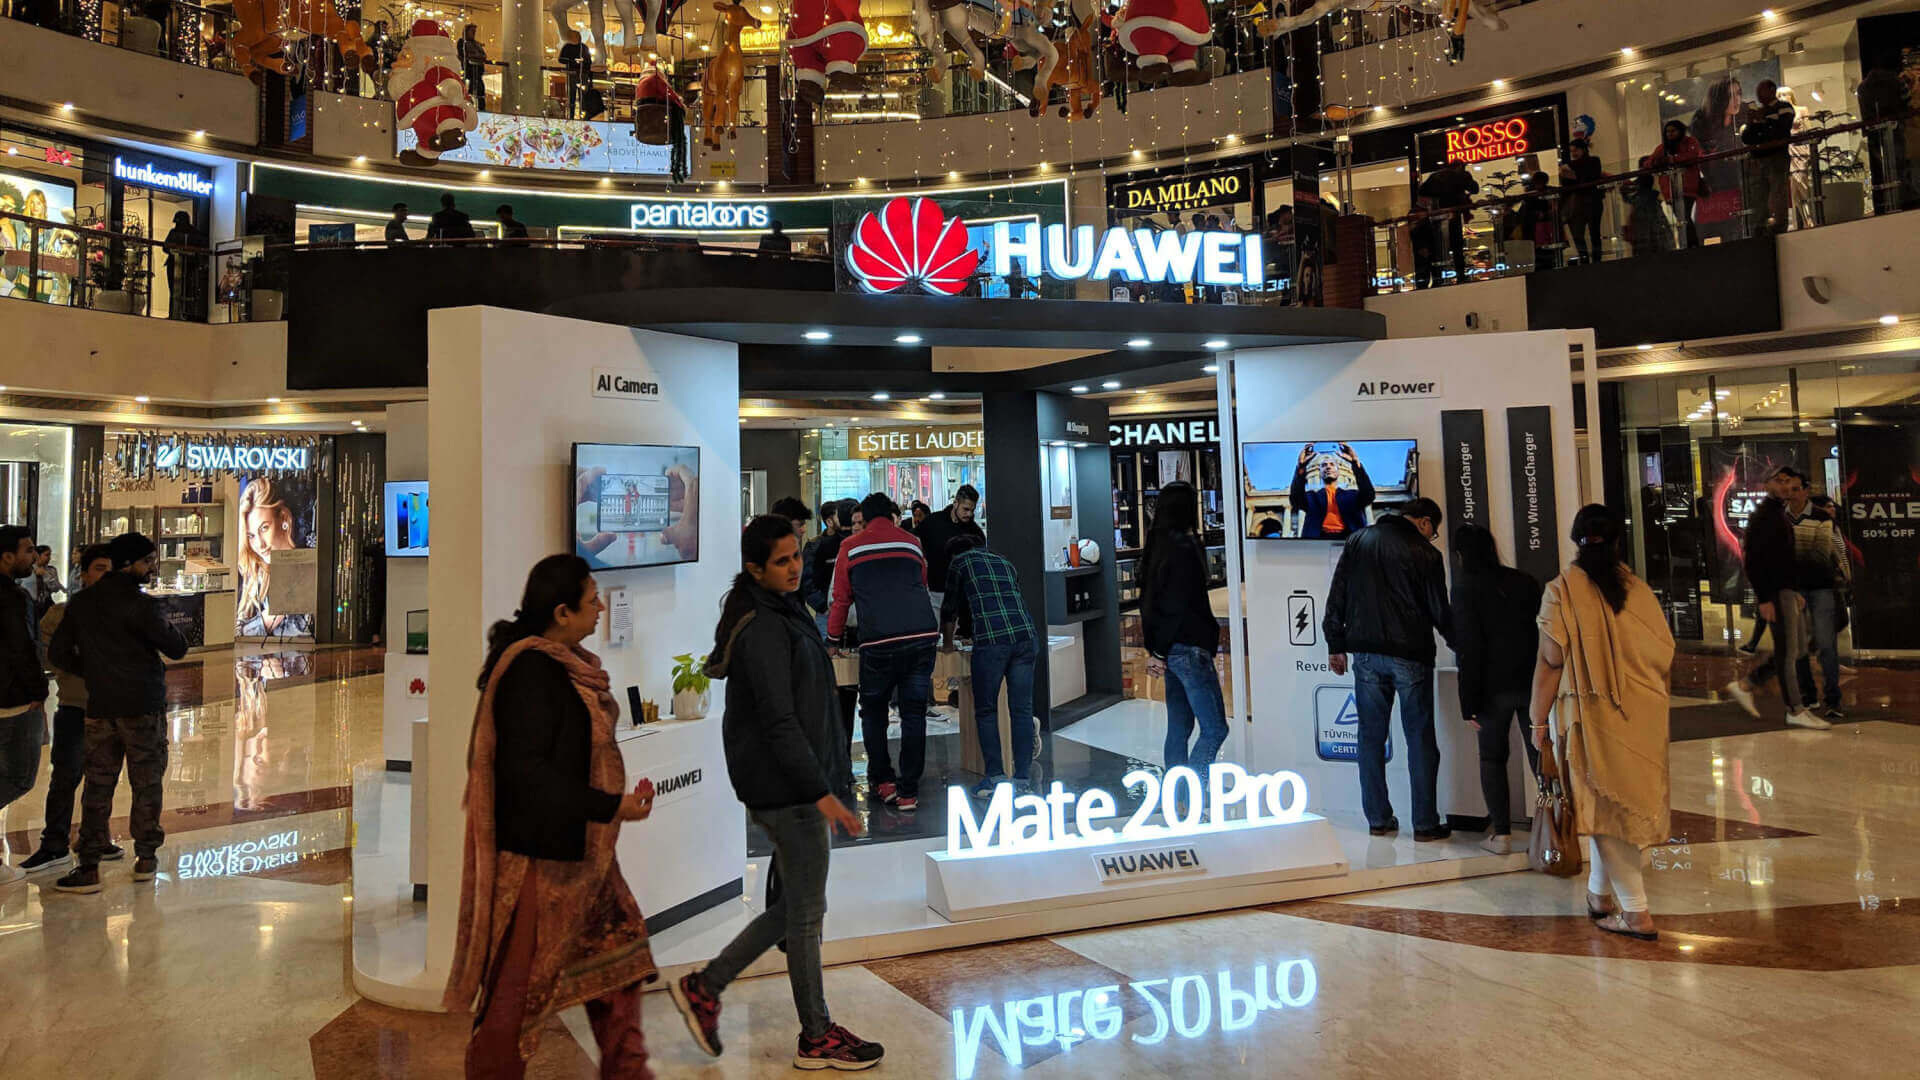 Indian Tax Authorities Conduct Raid at Huawei Offices Days After Chinese App Ban